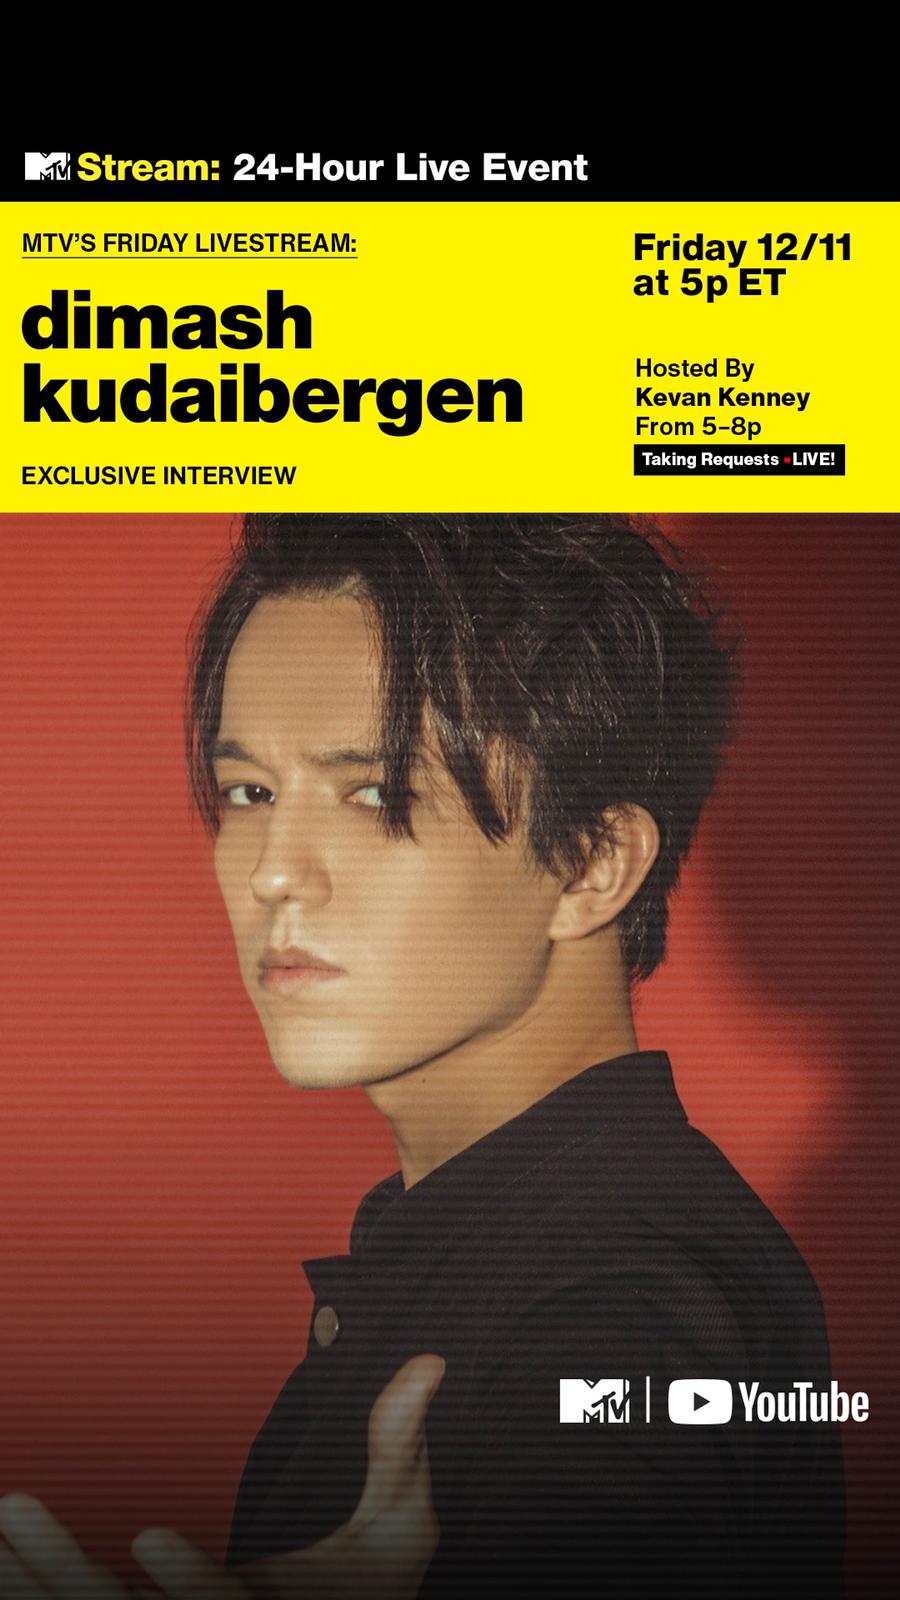 Dimash Qudaibergen's interview to be released on MTV USA